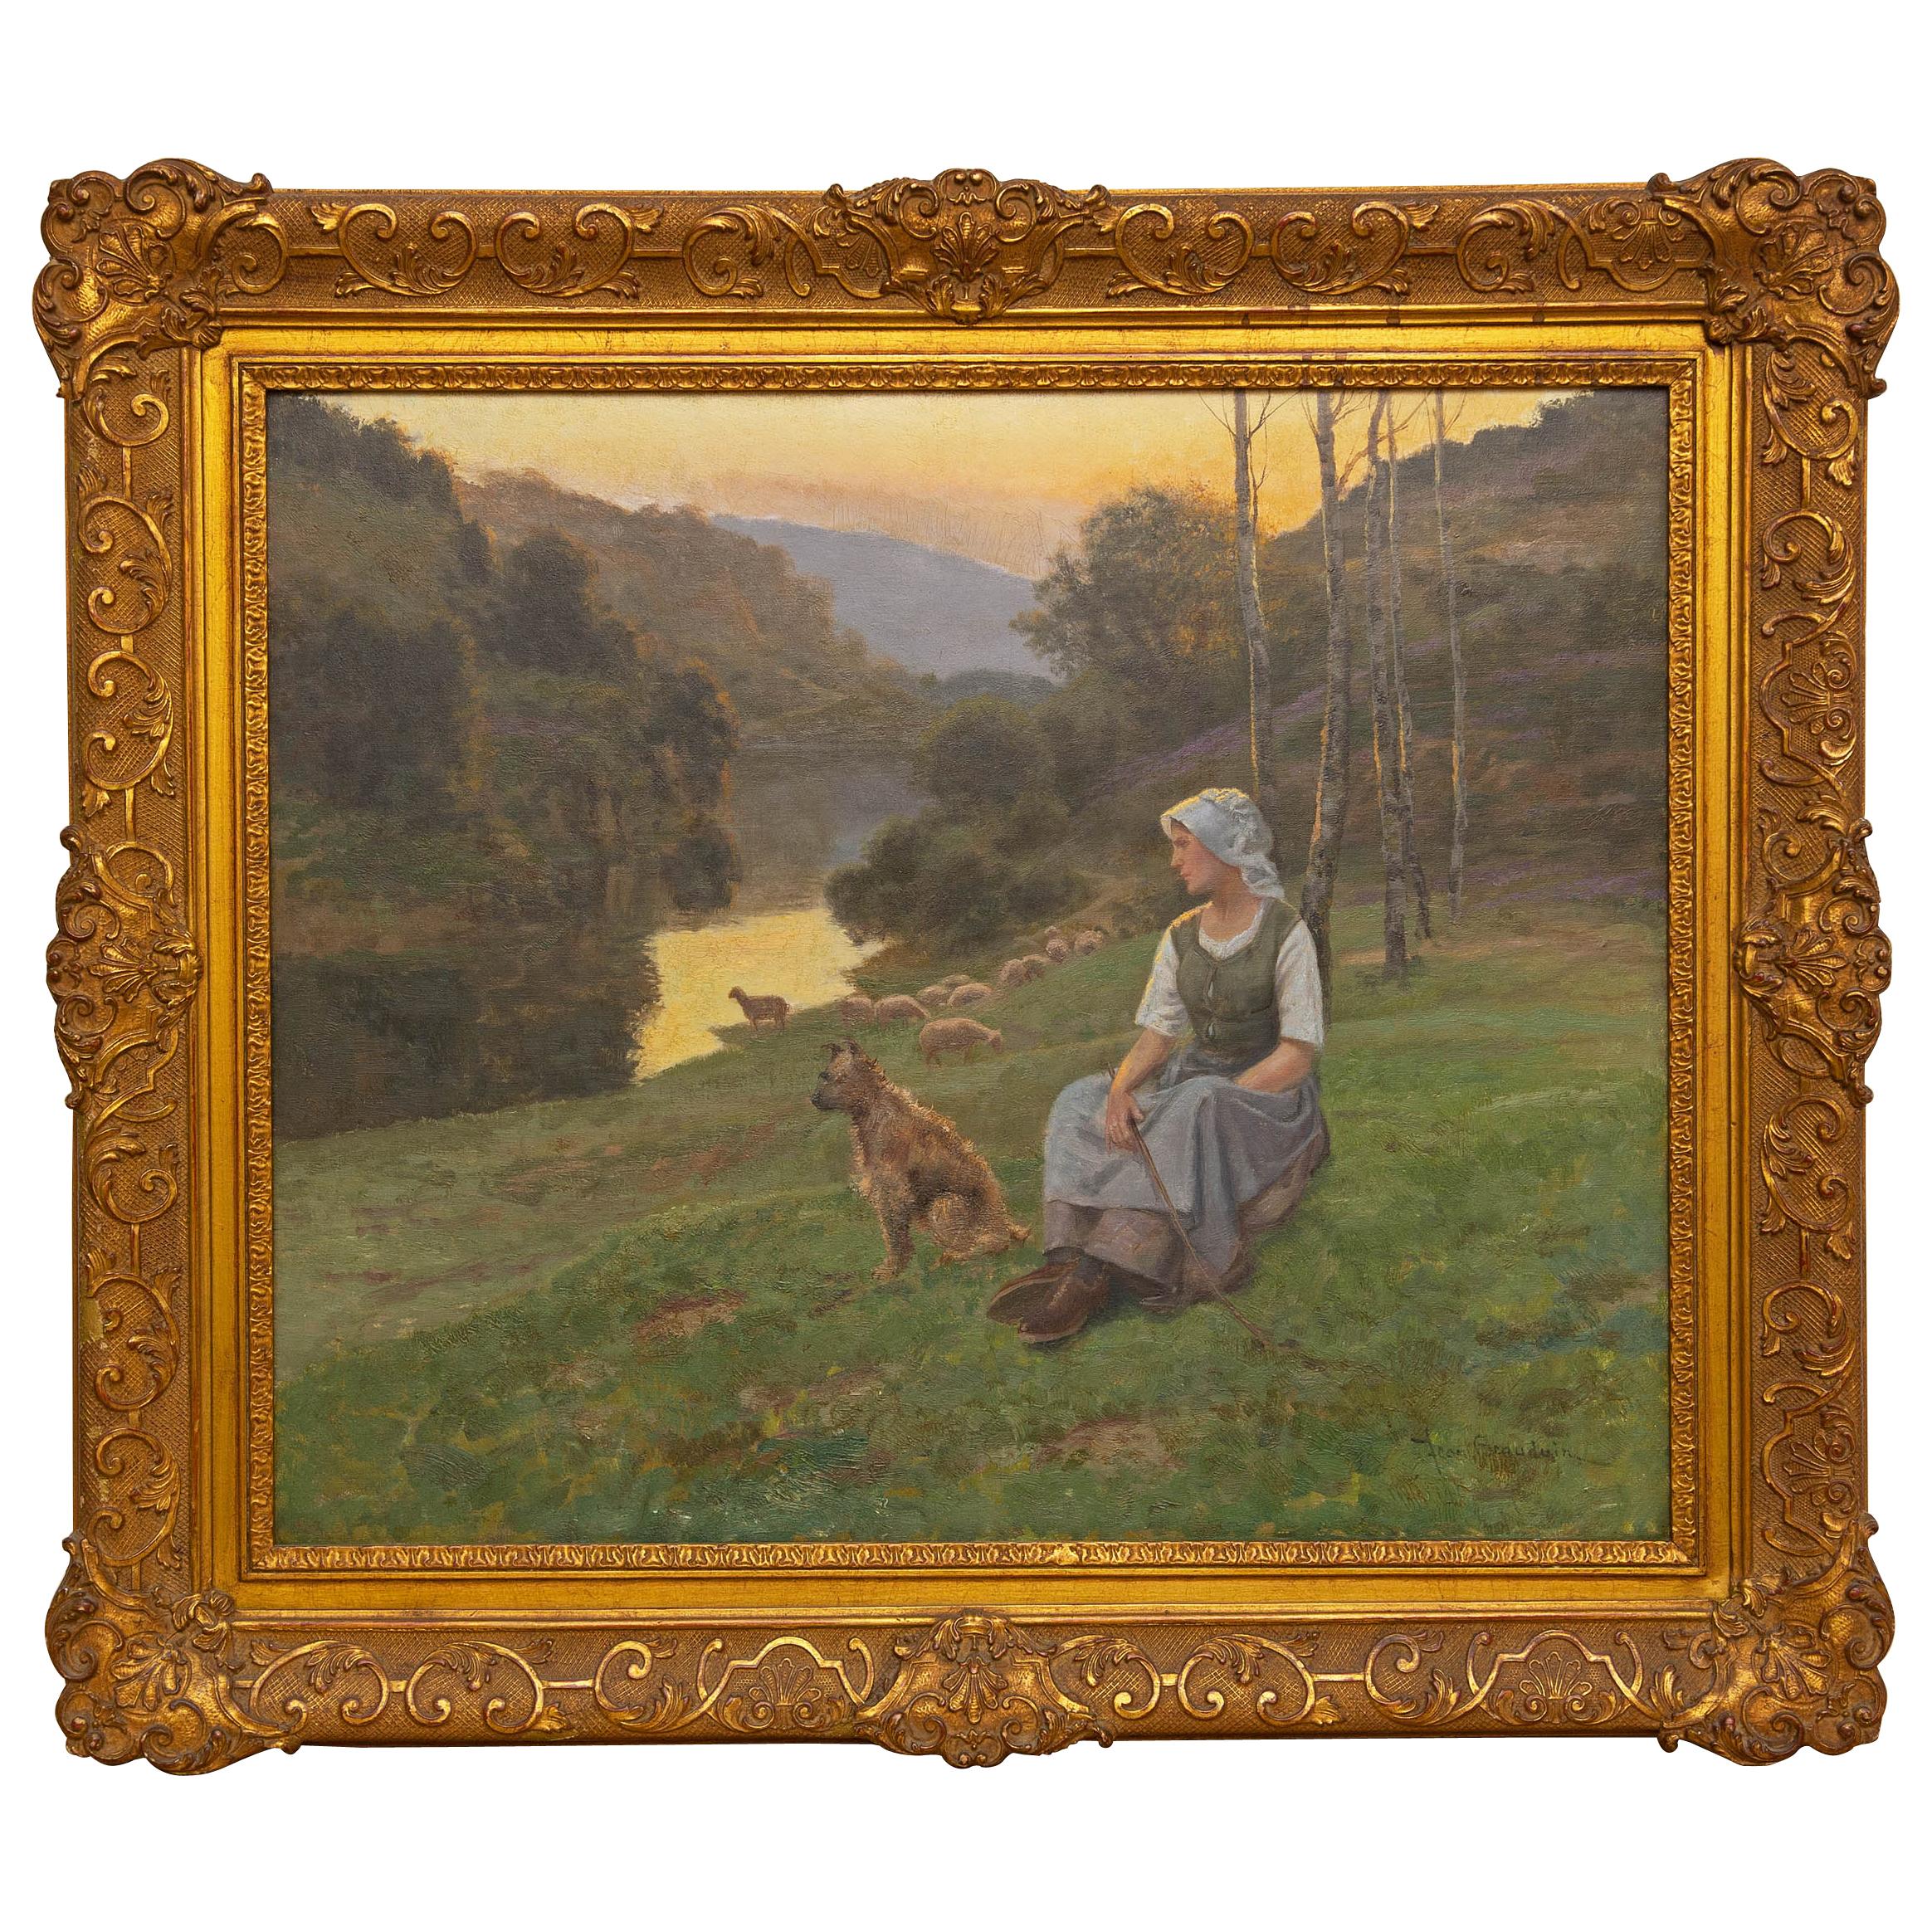 Romantic French Shepherdess 19th Century Painting by Jean Beauduin